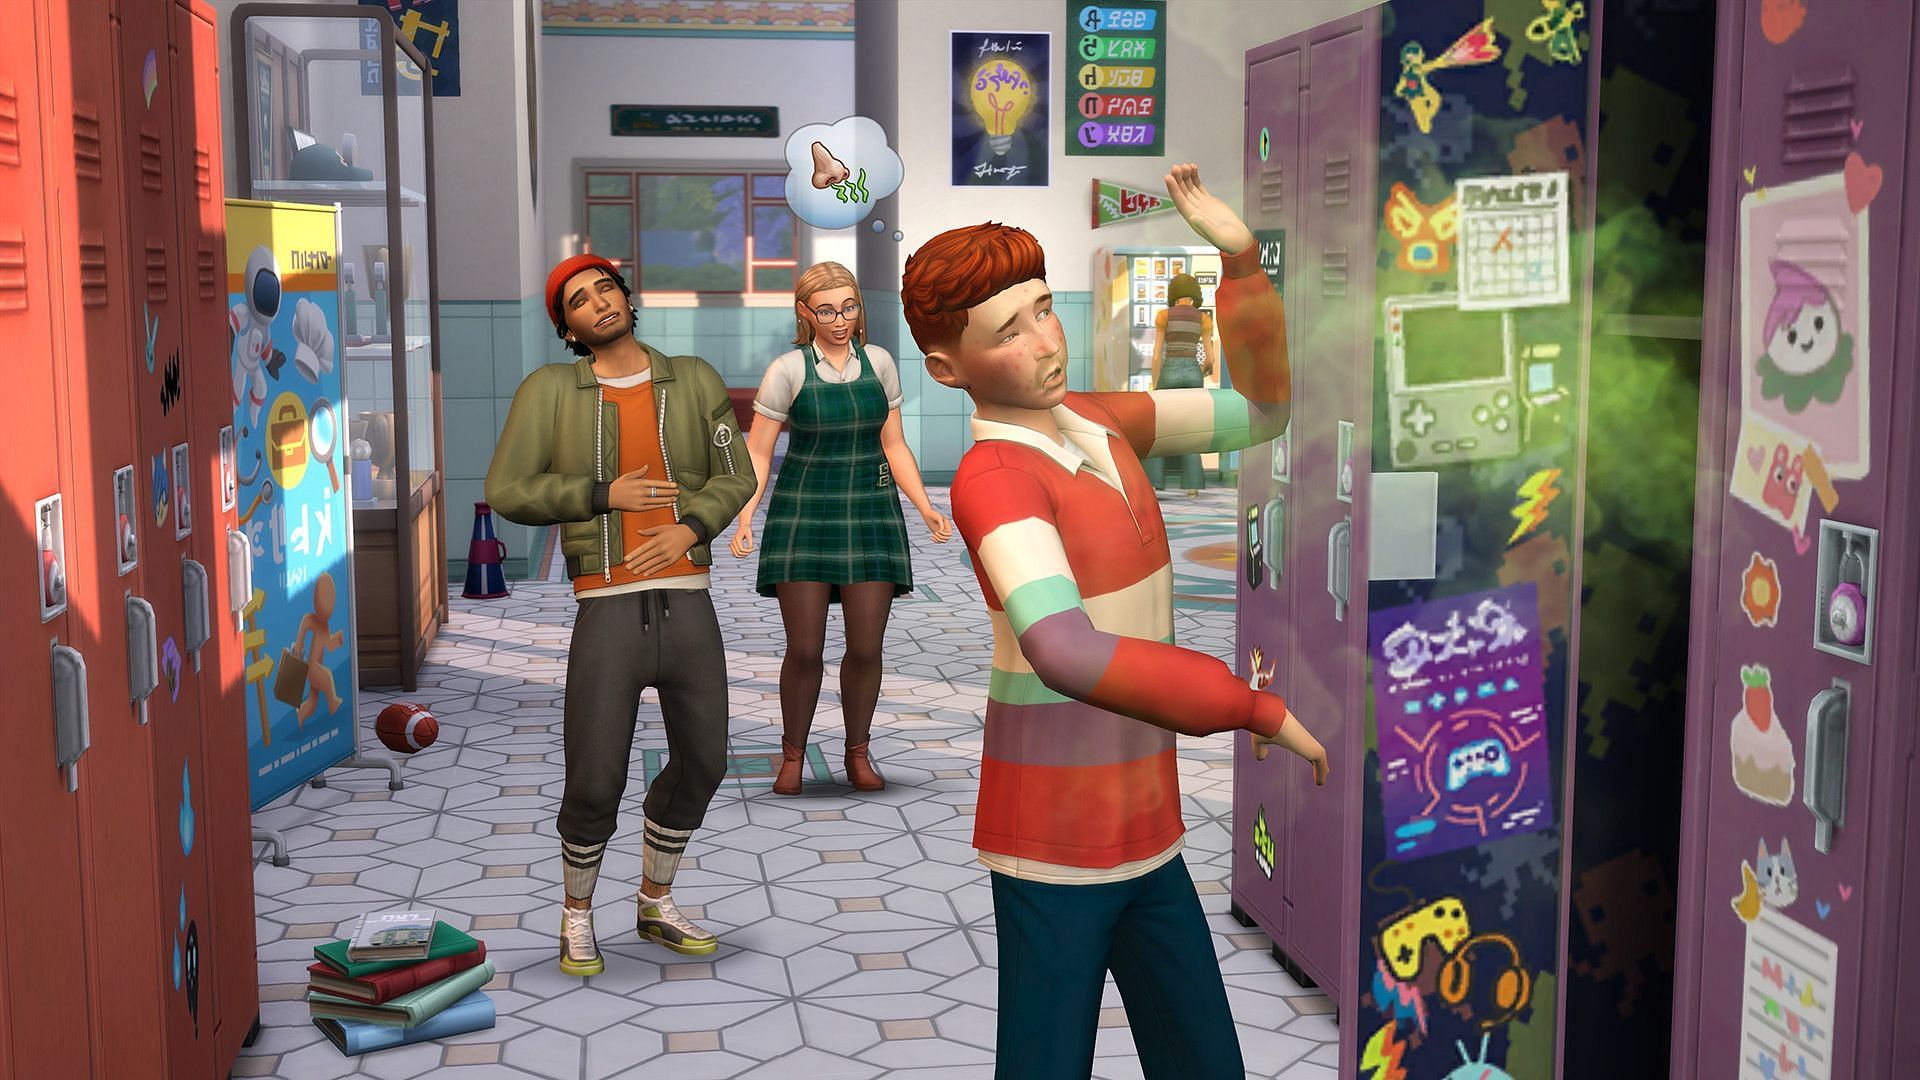 High School Years is one of the best Sims 4 Expansion Packs (Image via Steam)